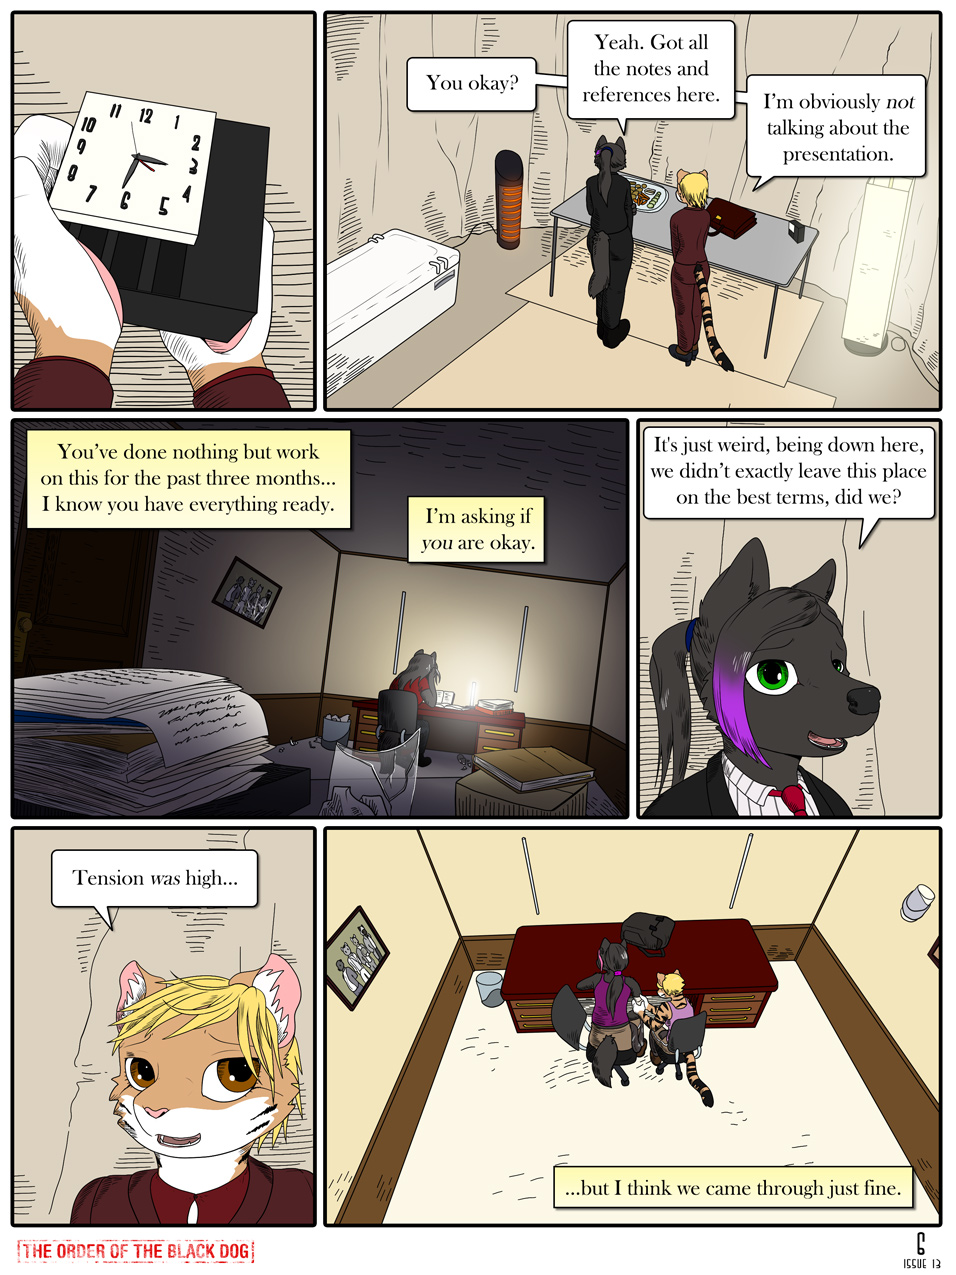 Issue 13, Page 6